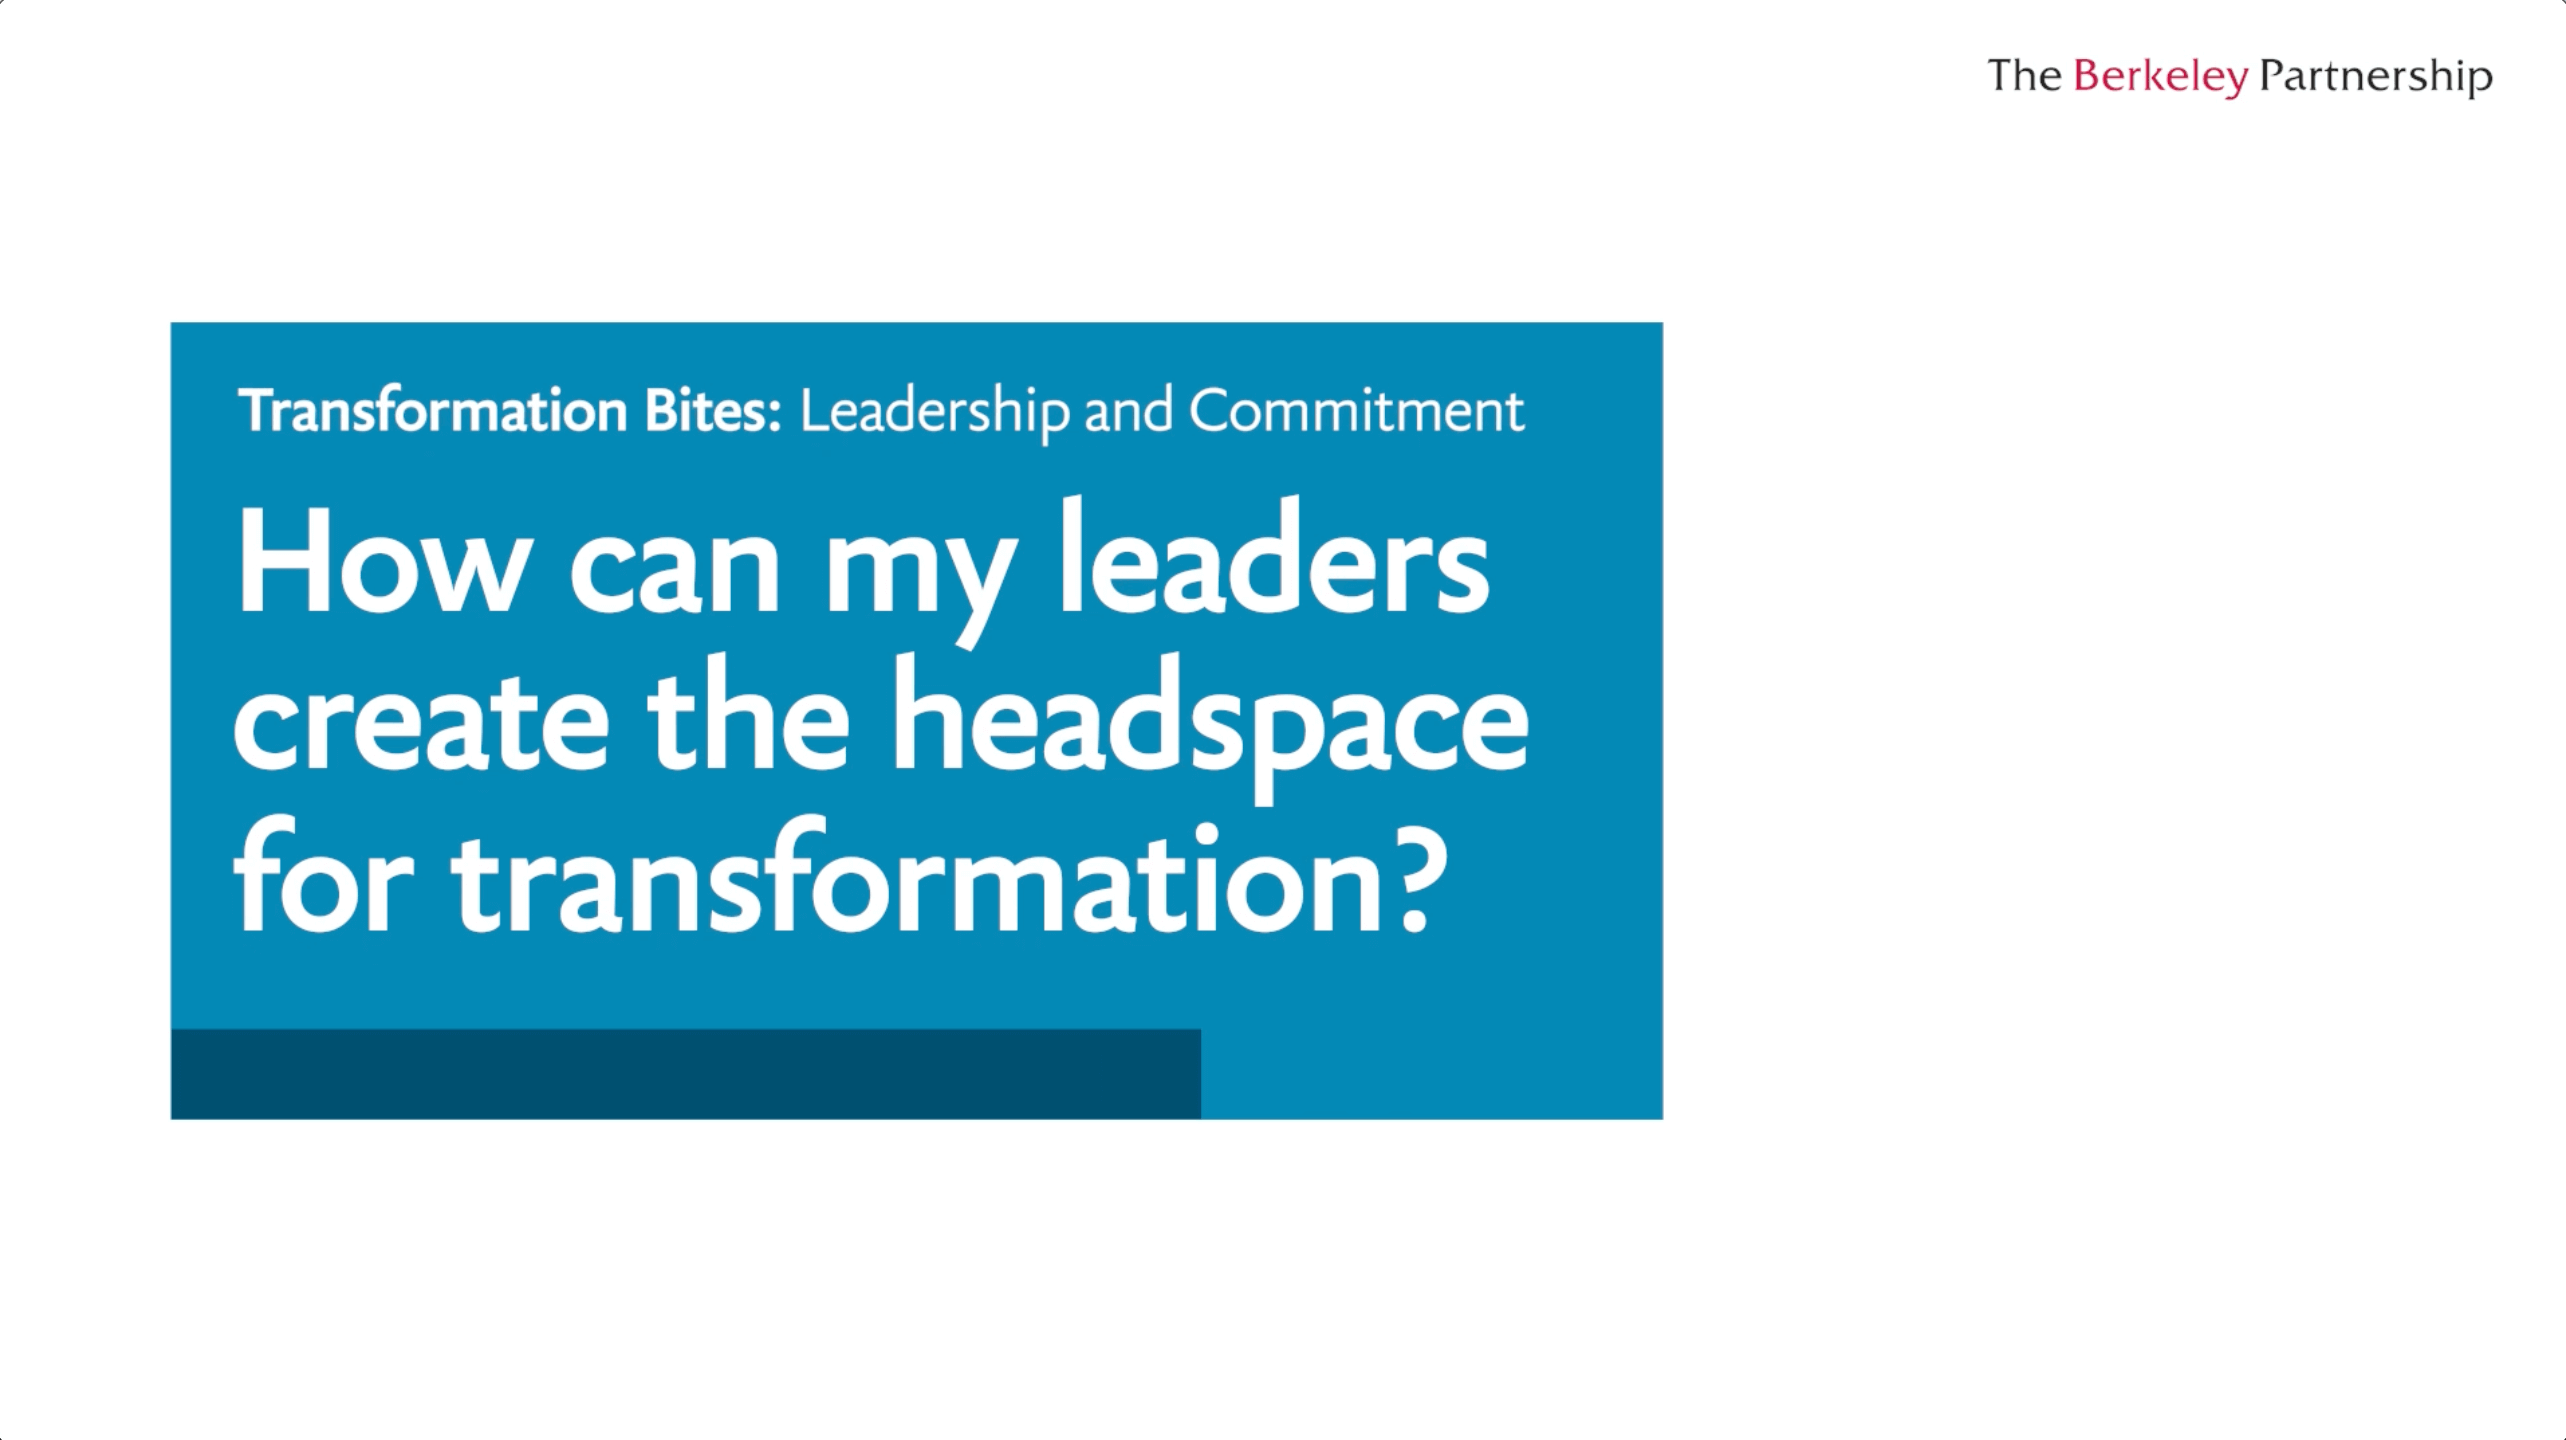 How can my leaders create the headspace for transformation? 